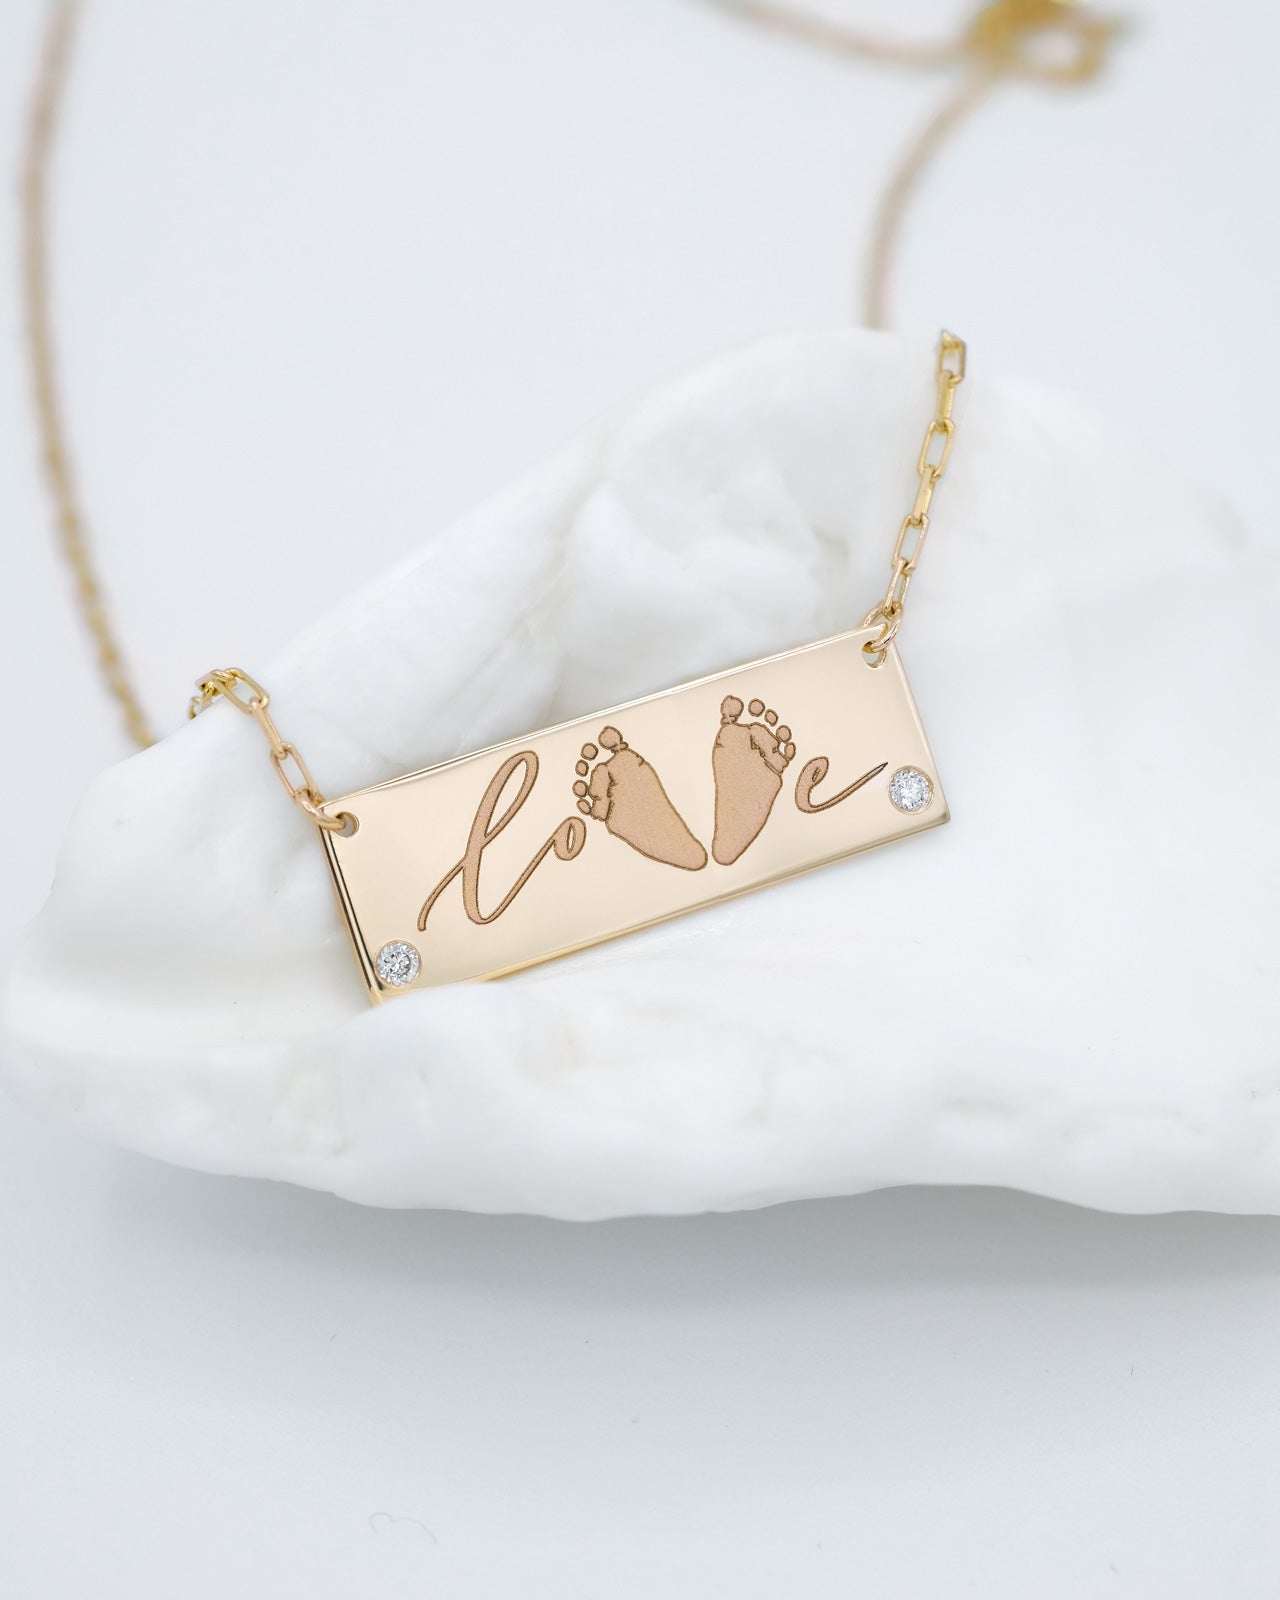 Footprints Mathis LOVE Necklace in 14K Gold with Diamonds